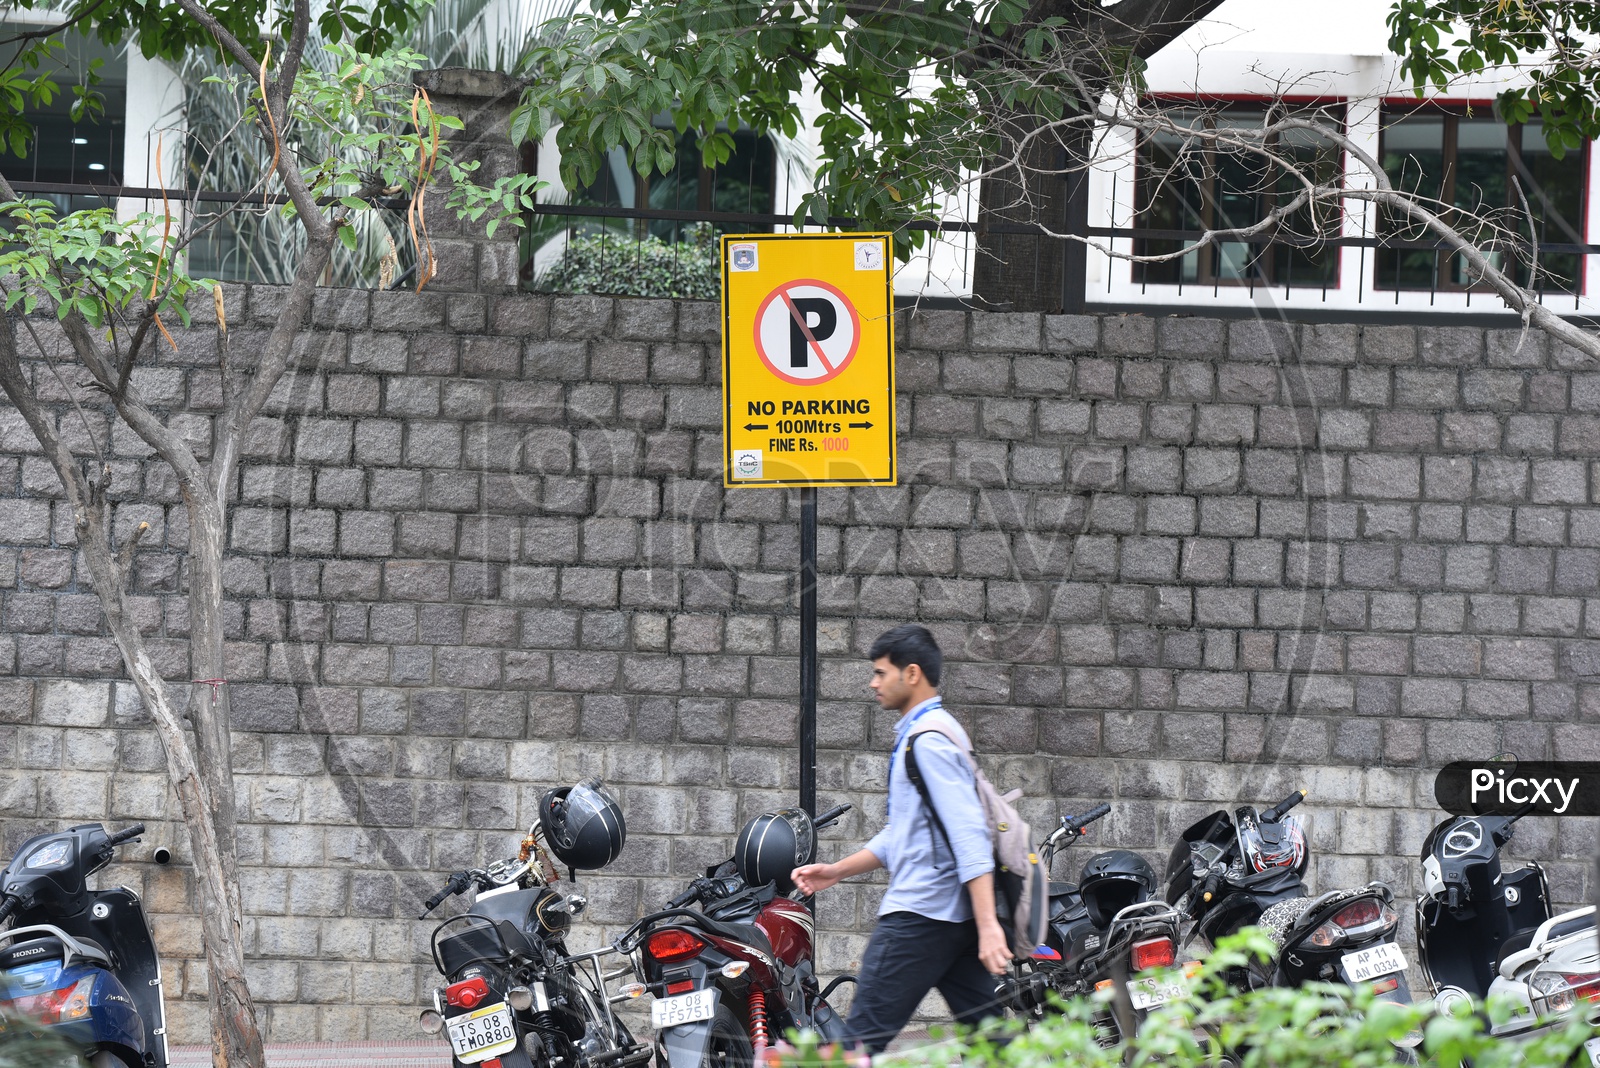 Vehicles Parking at a NO Parking Zone In Hyderabad